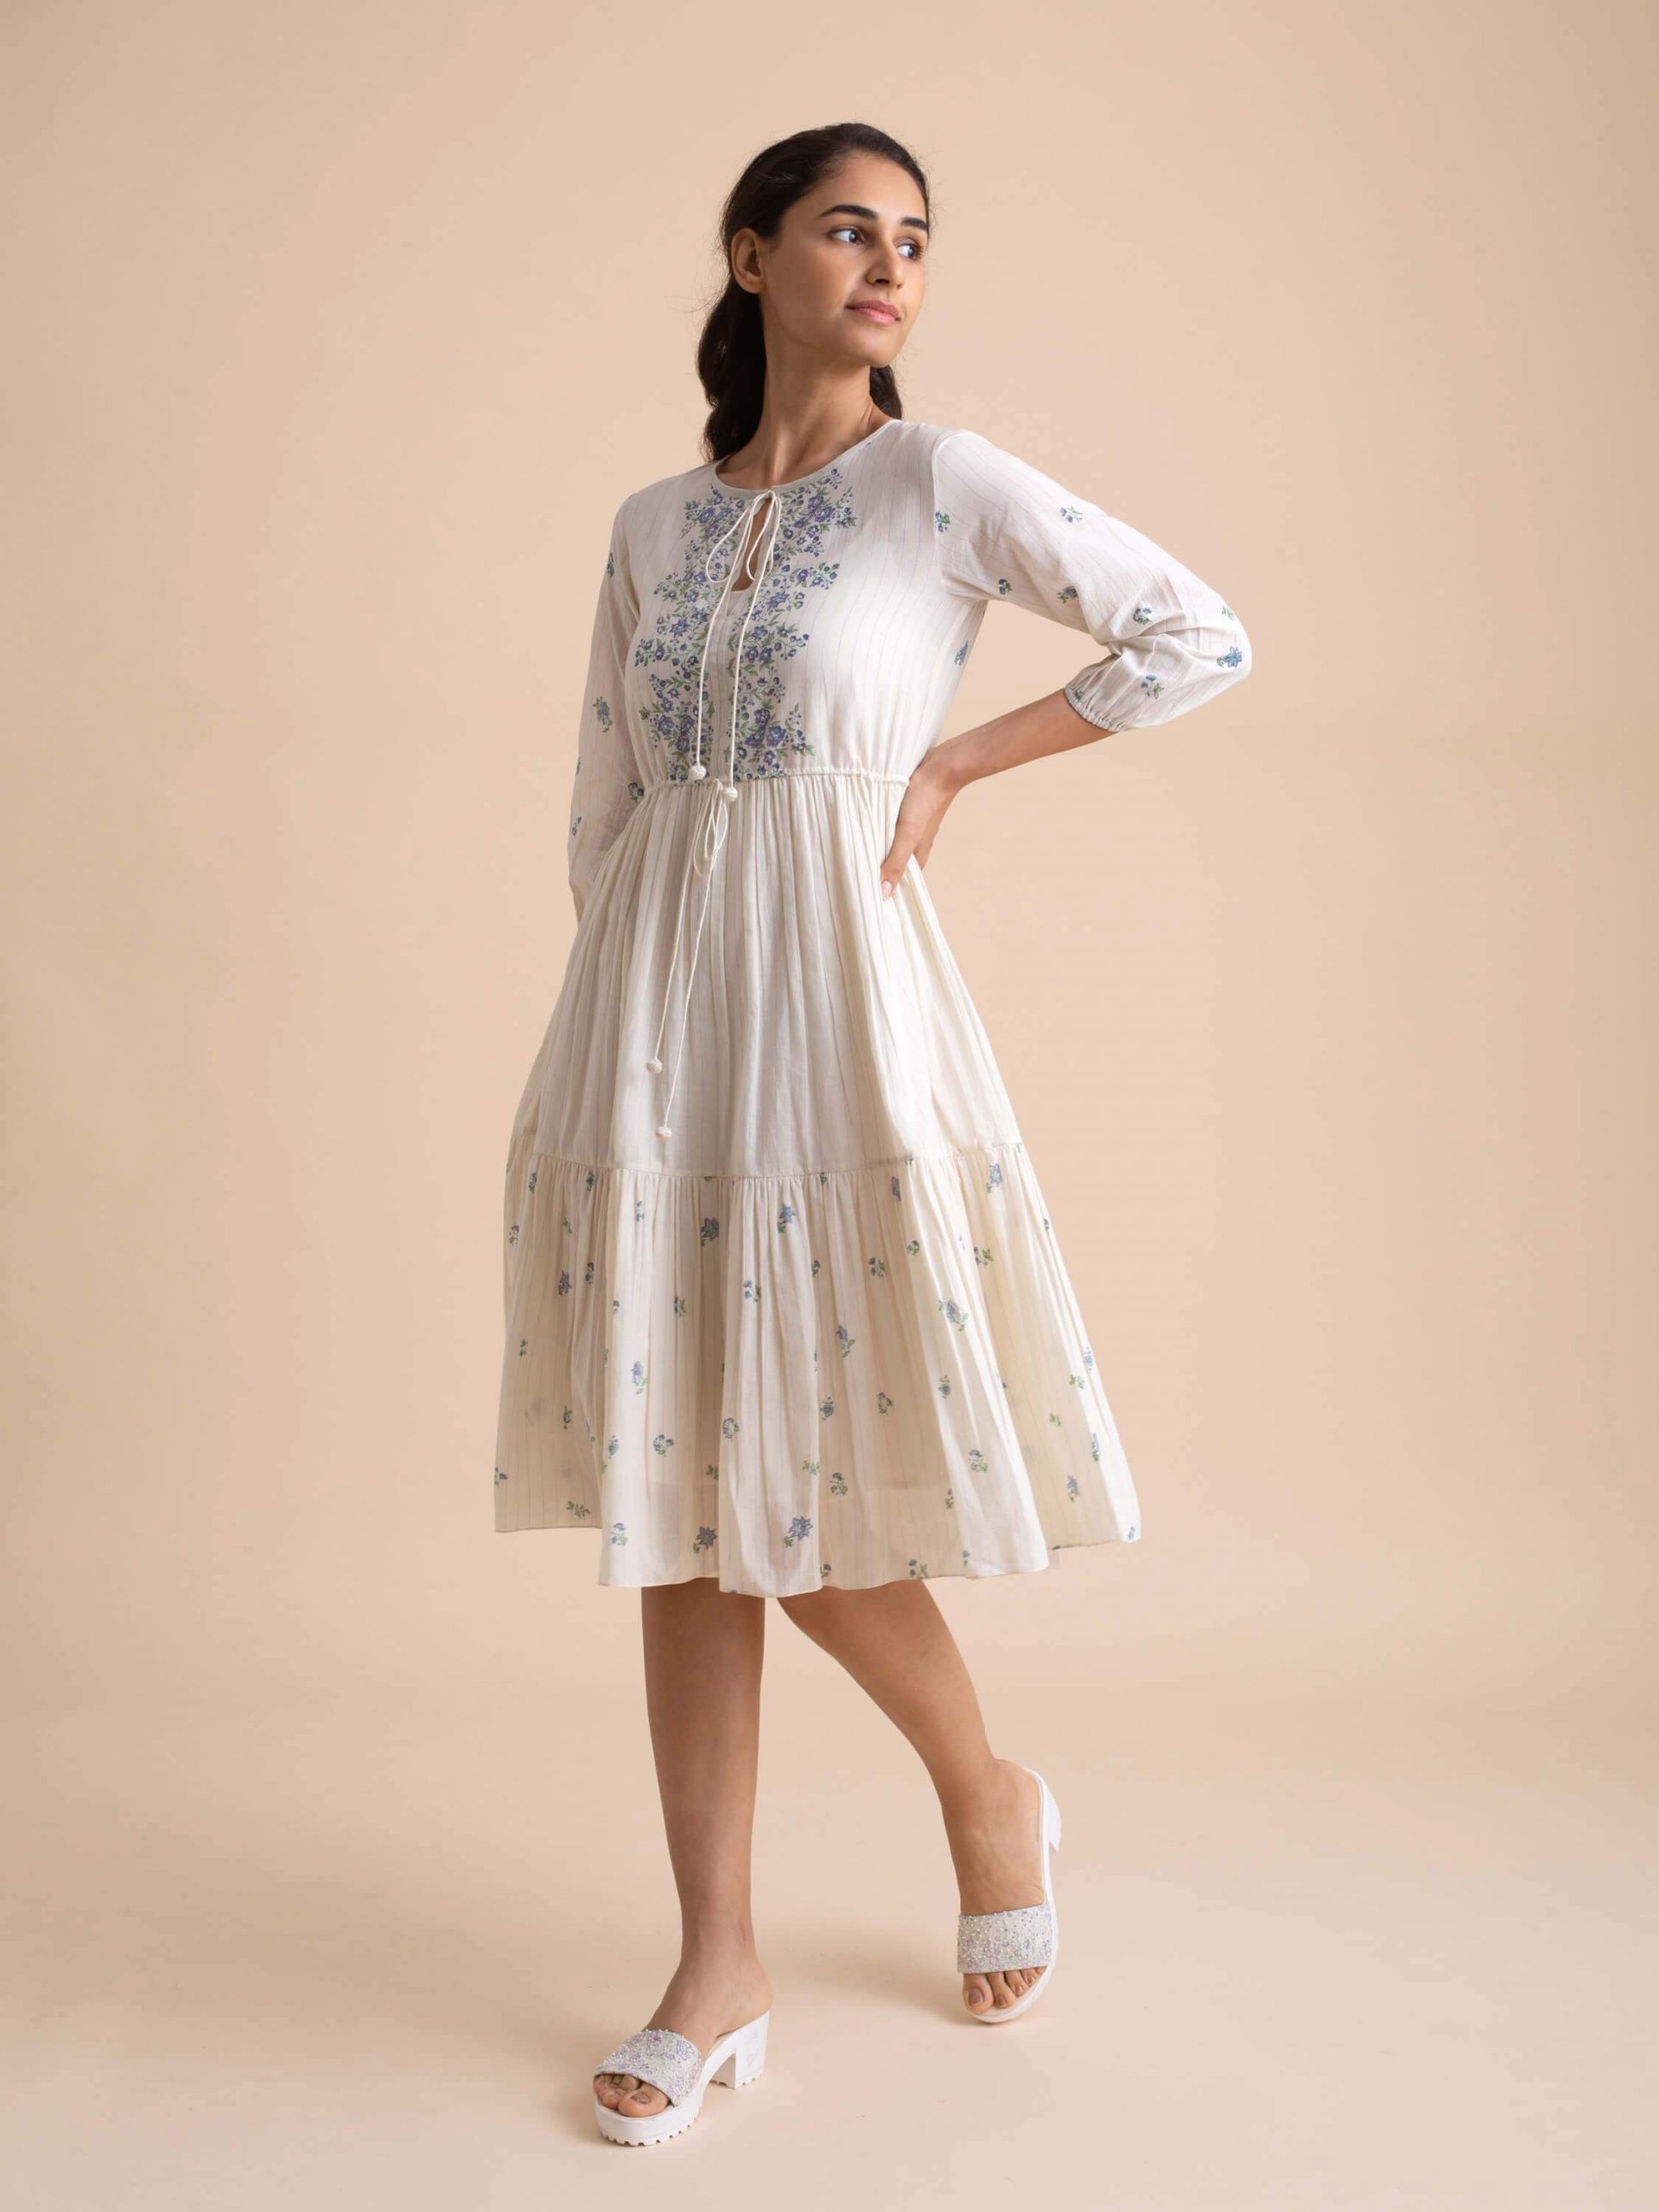 A Relaxed Vibe dress